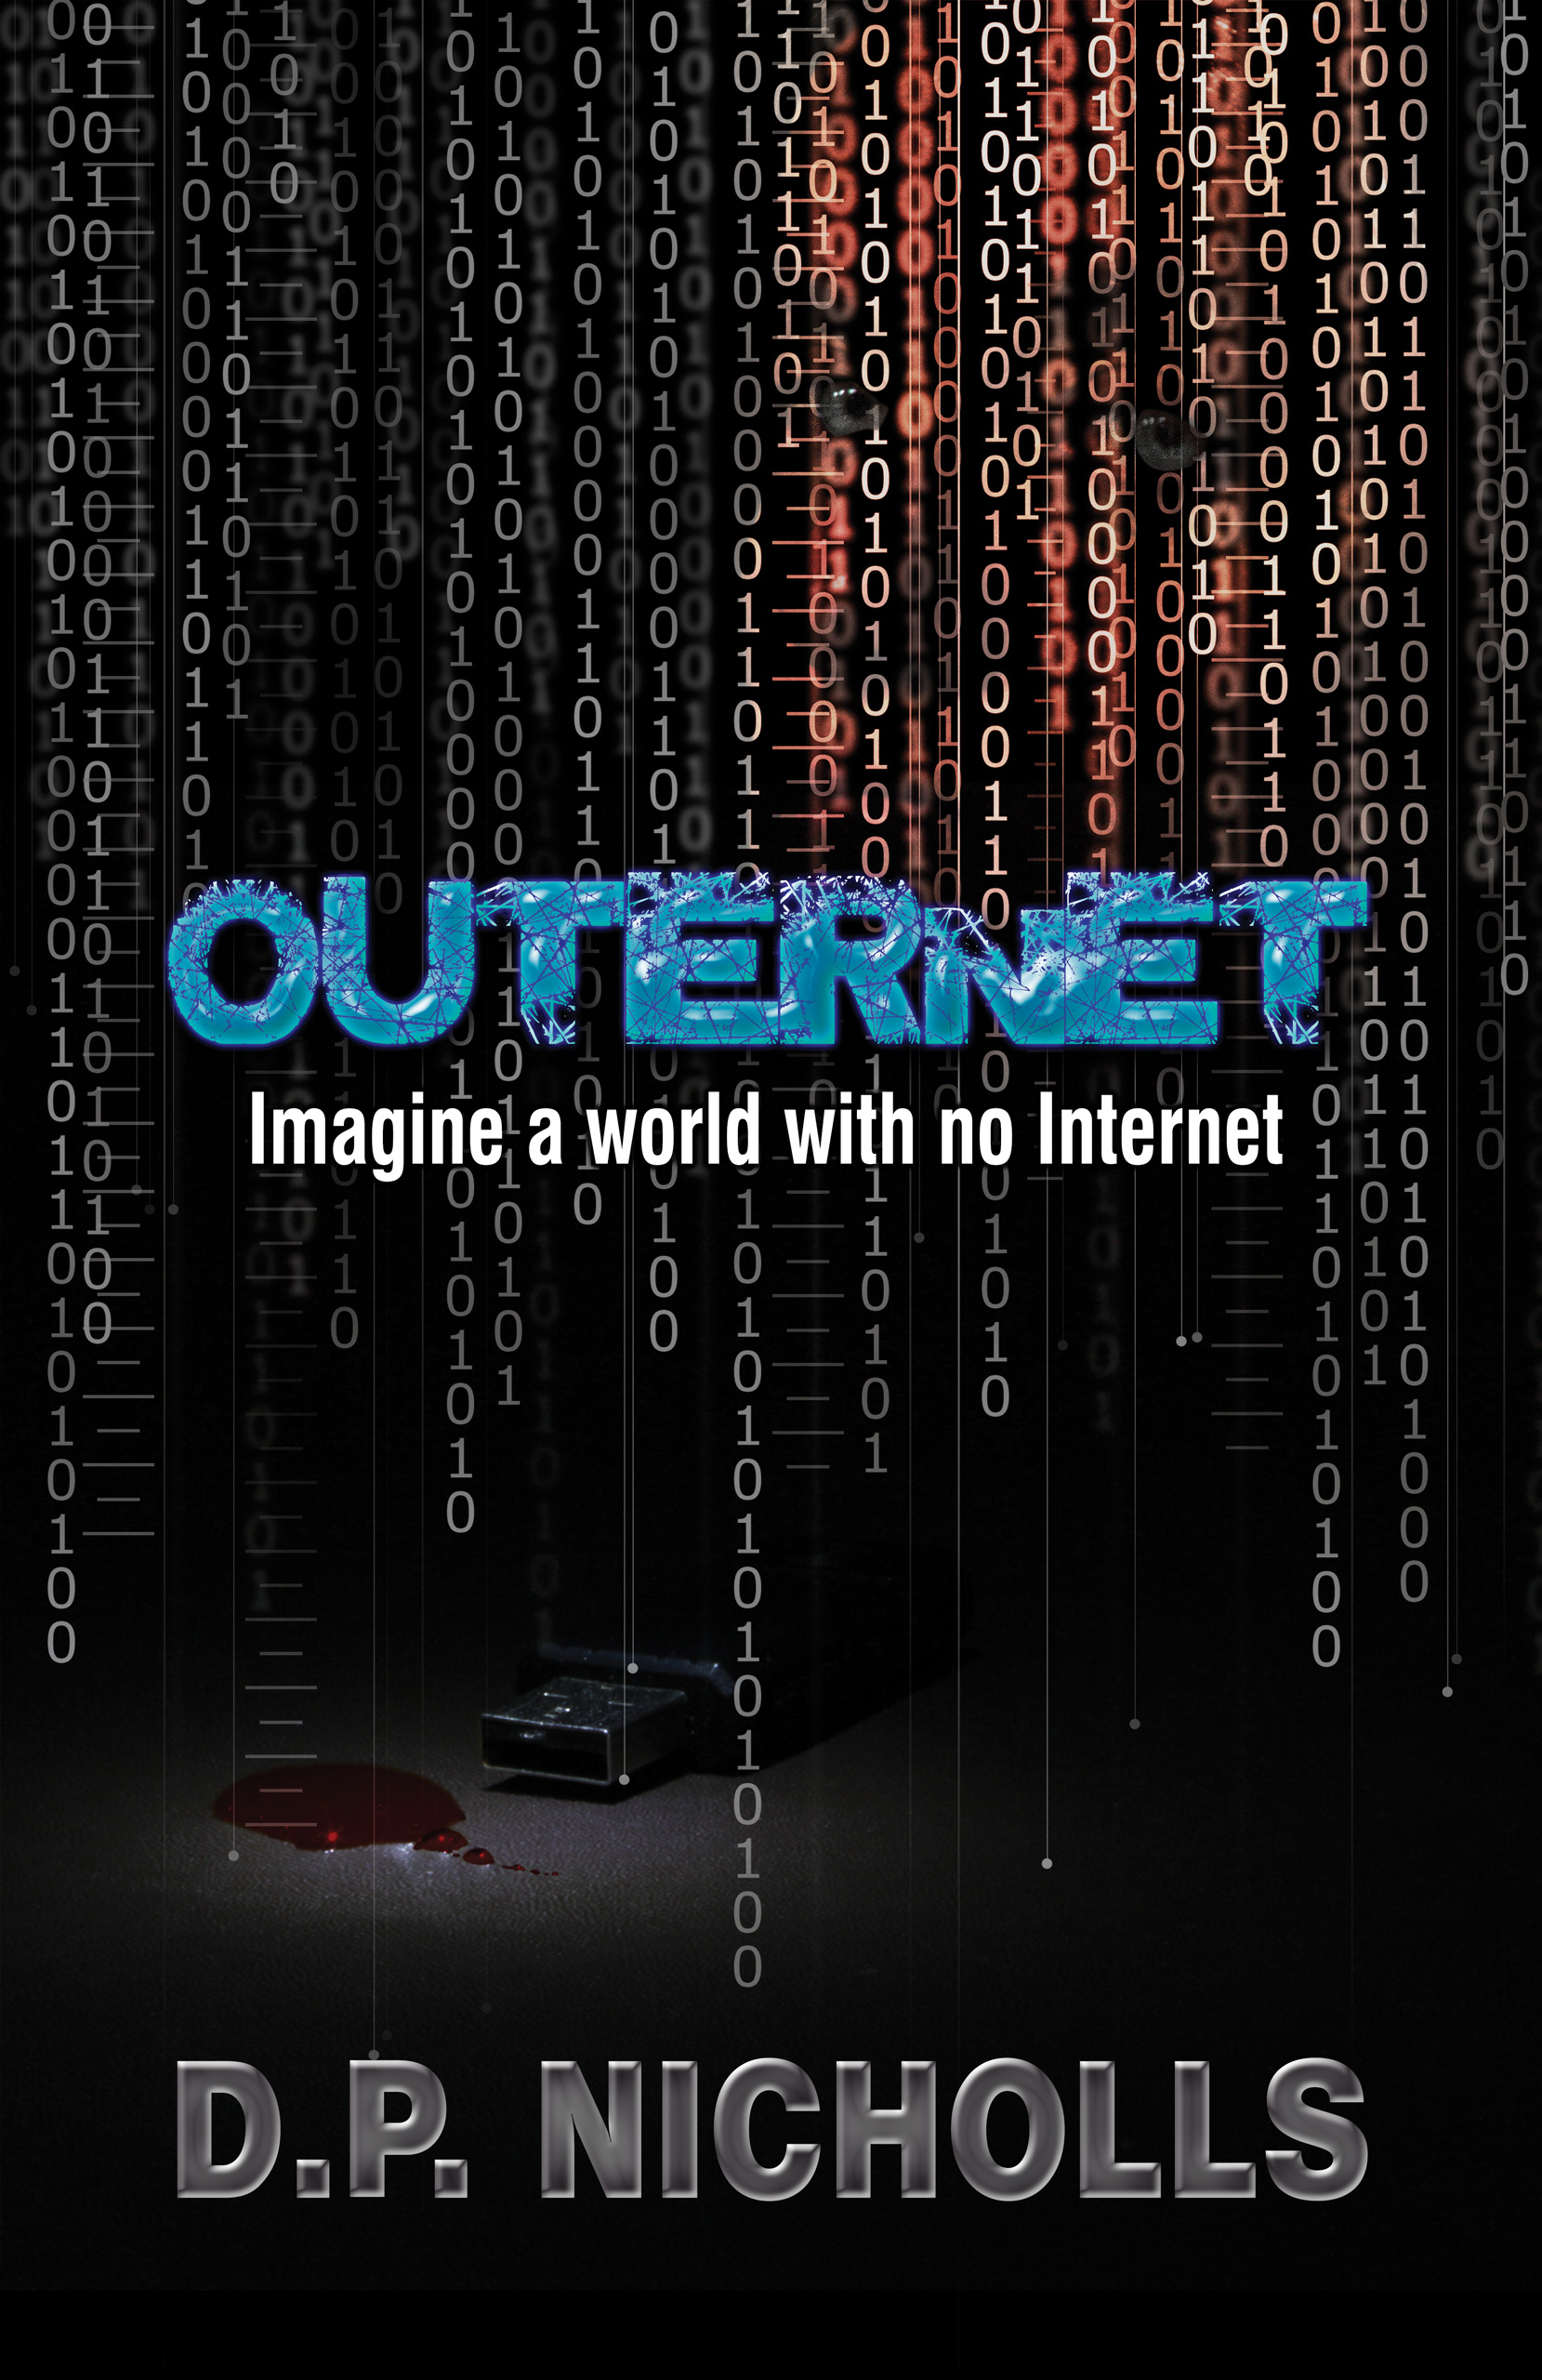 Outernet, by D P Nicholls, front cover image.